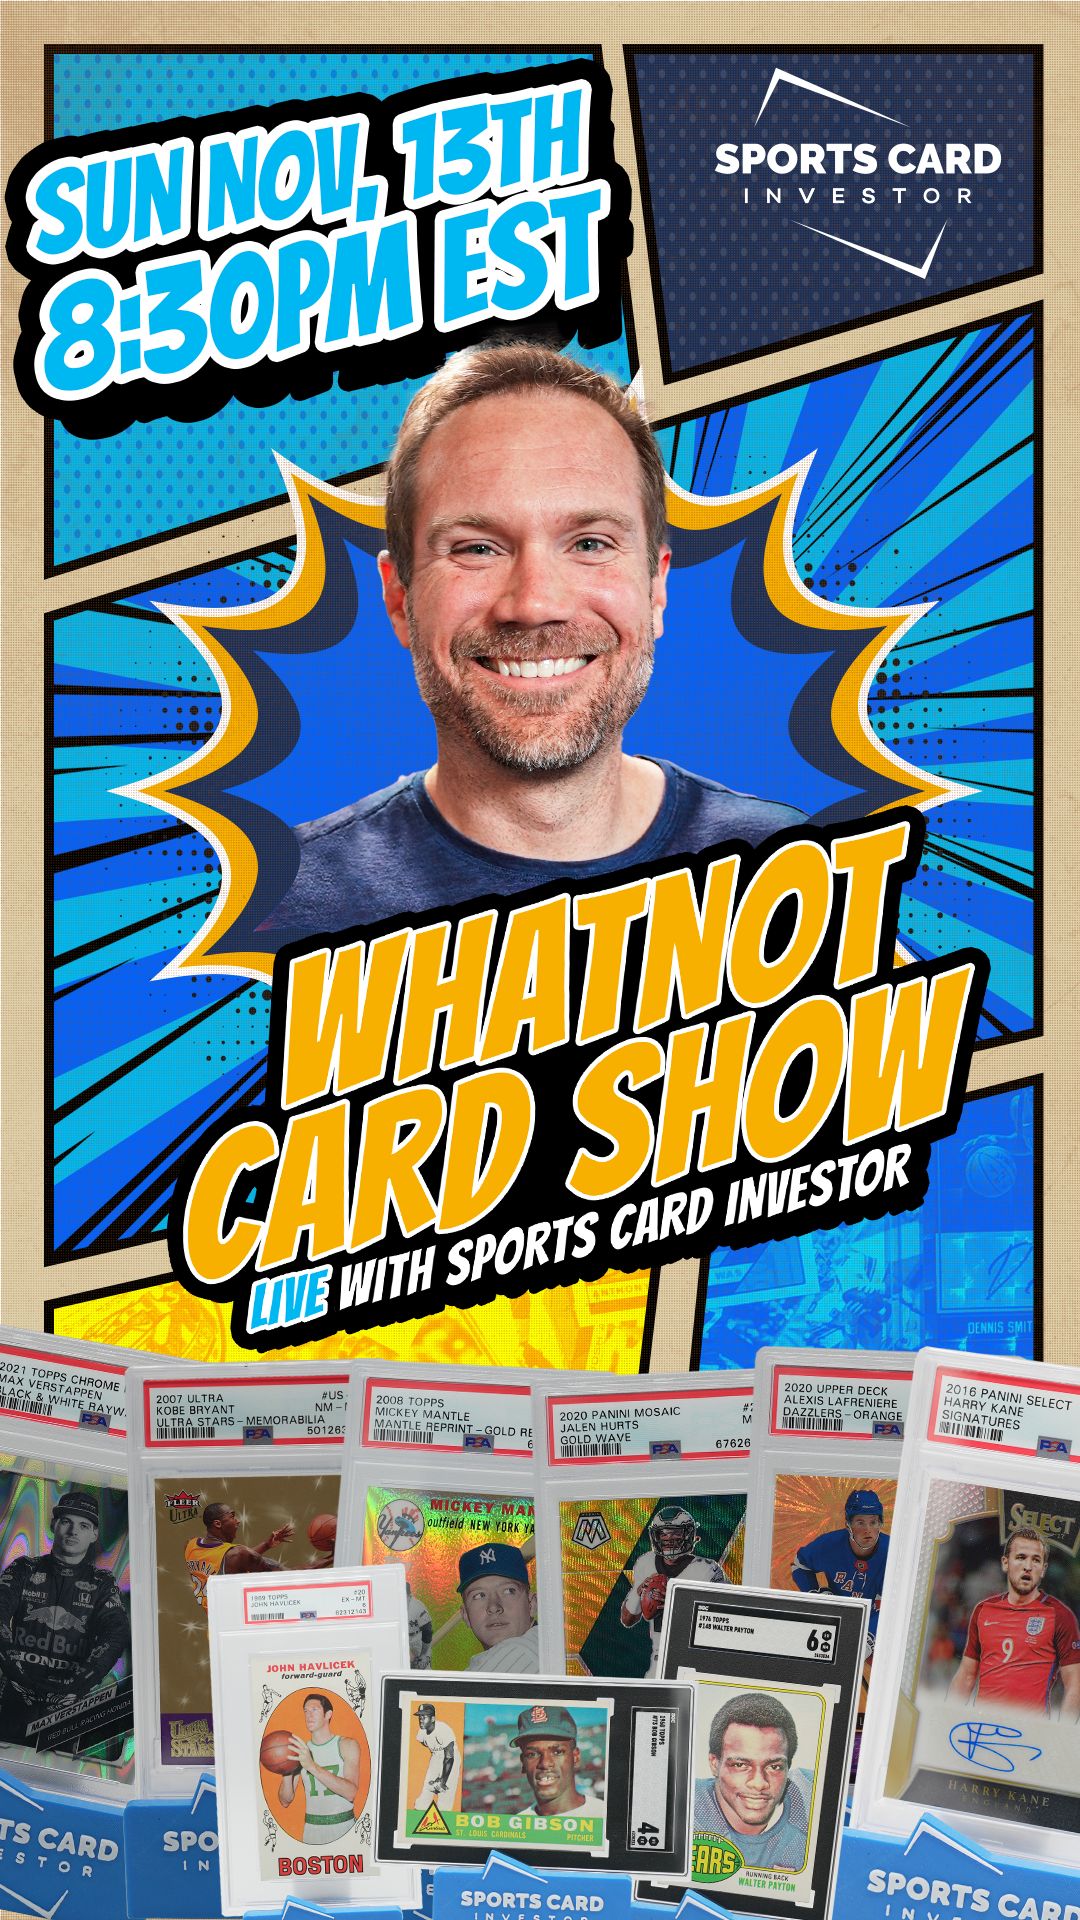 Everything You Need To Know for the Dallas Card Show – Sports Card Investor